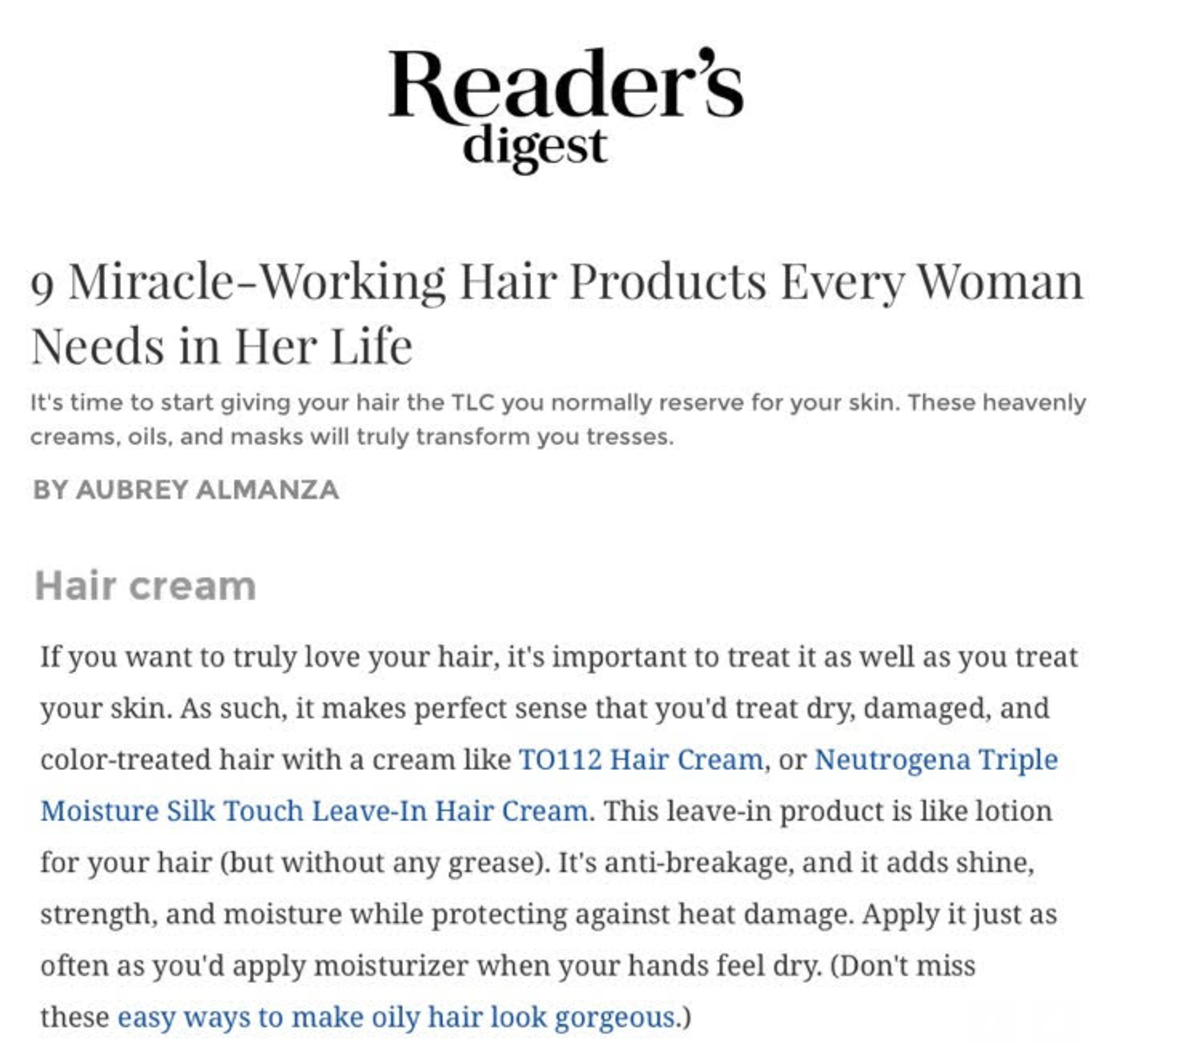 readers digest TO112 miracle working hair products 